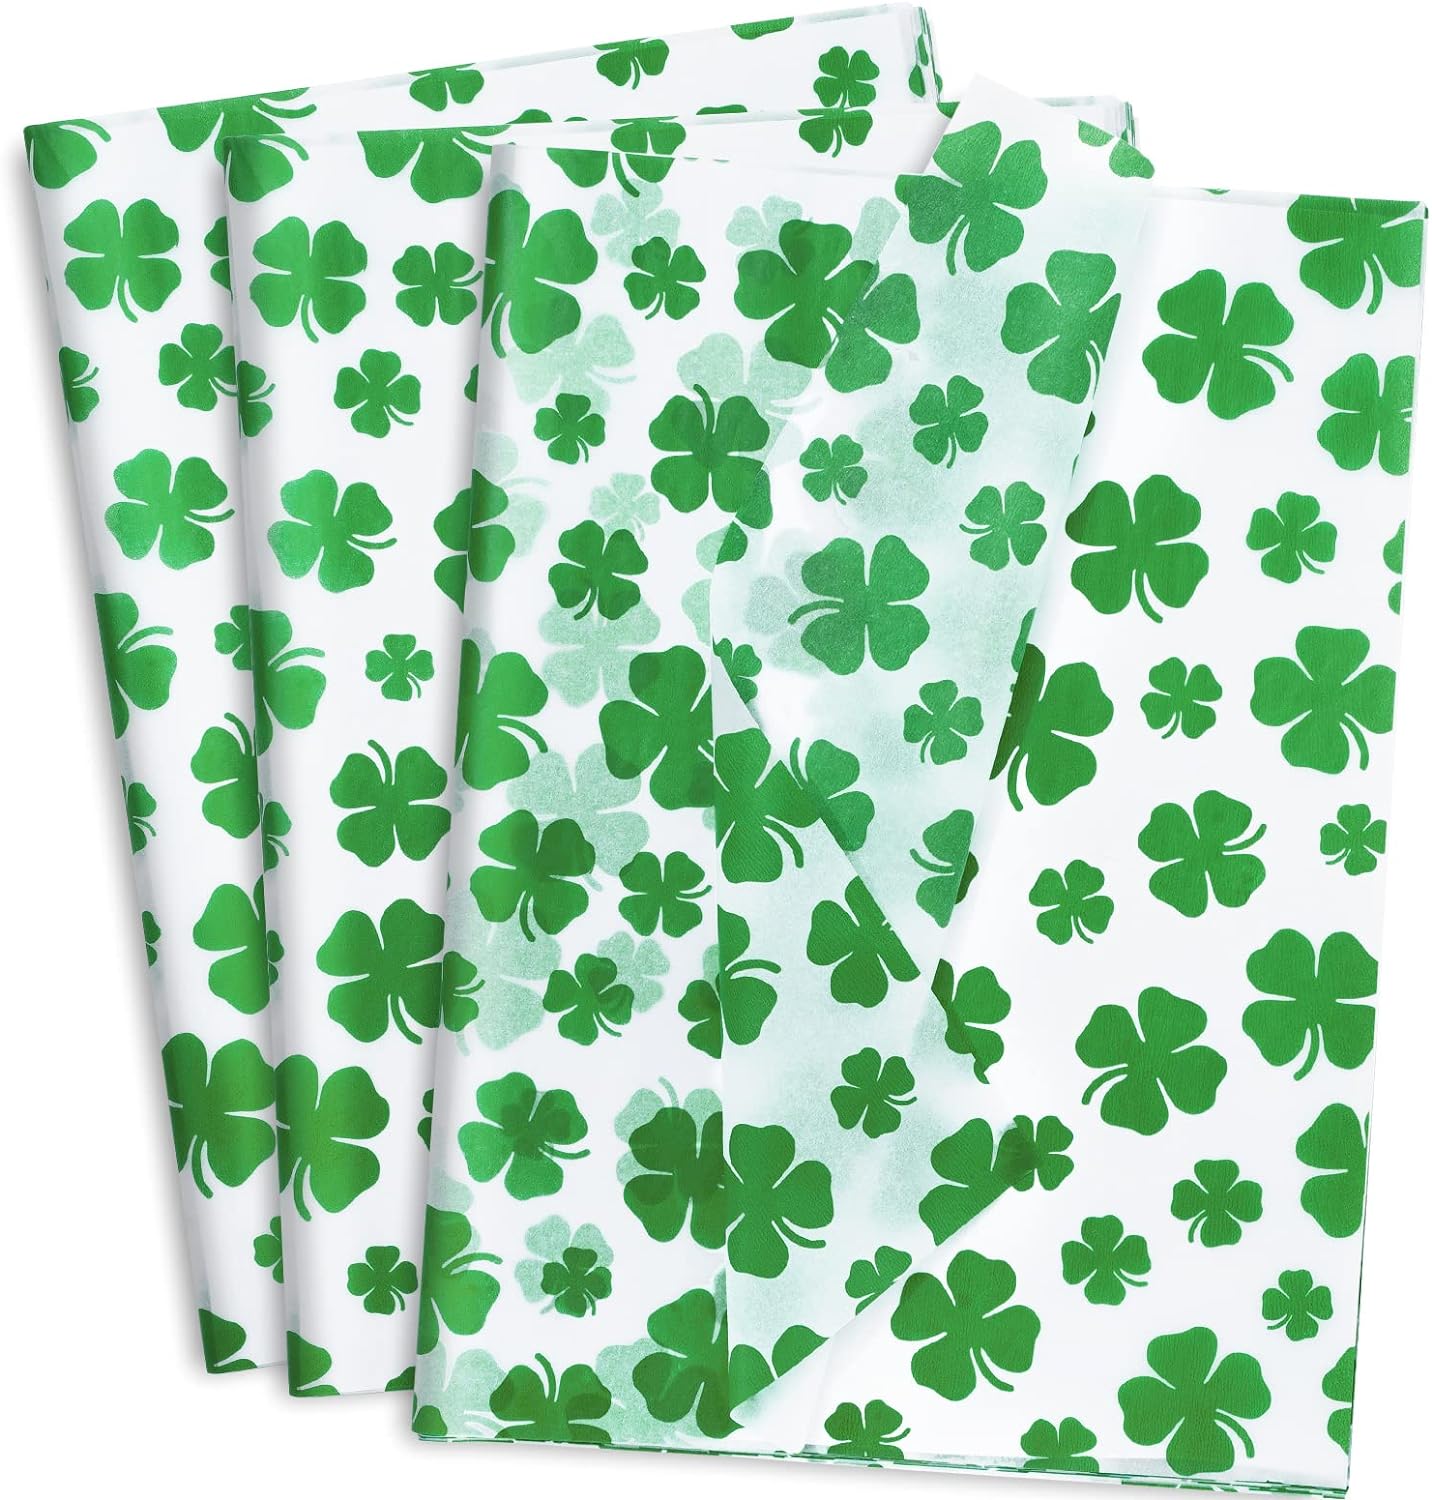 Whaline St. Patrick' Day Tissue Paper Watercolor Shamrock Wrapping Paper Green Clover Gift Wrapping Paper Art Paper for Home DIY Gift Bags Party Favor Decor, 14 x 20 Inch, 100 Sheet